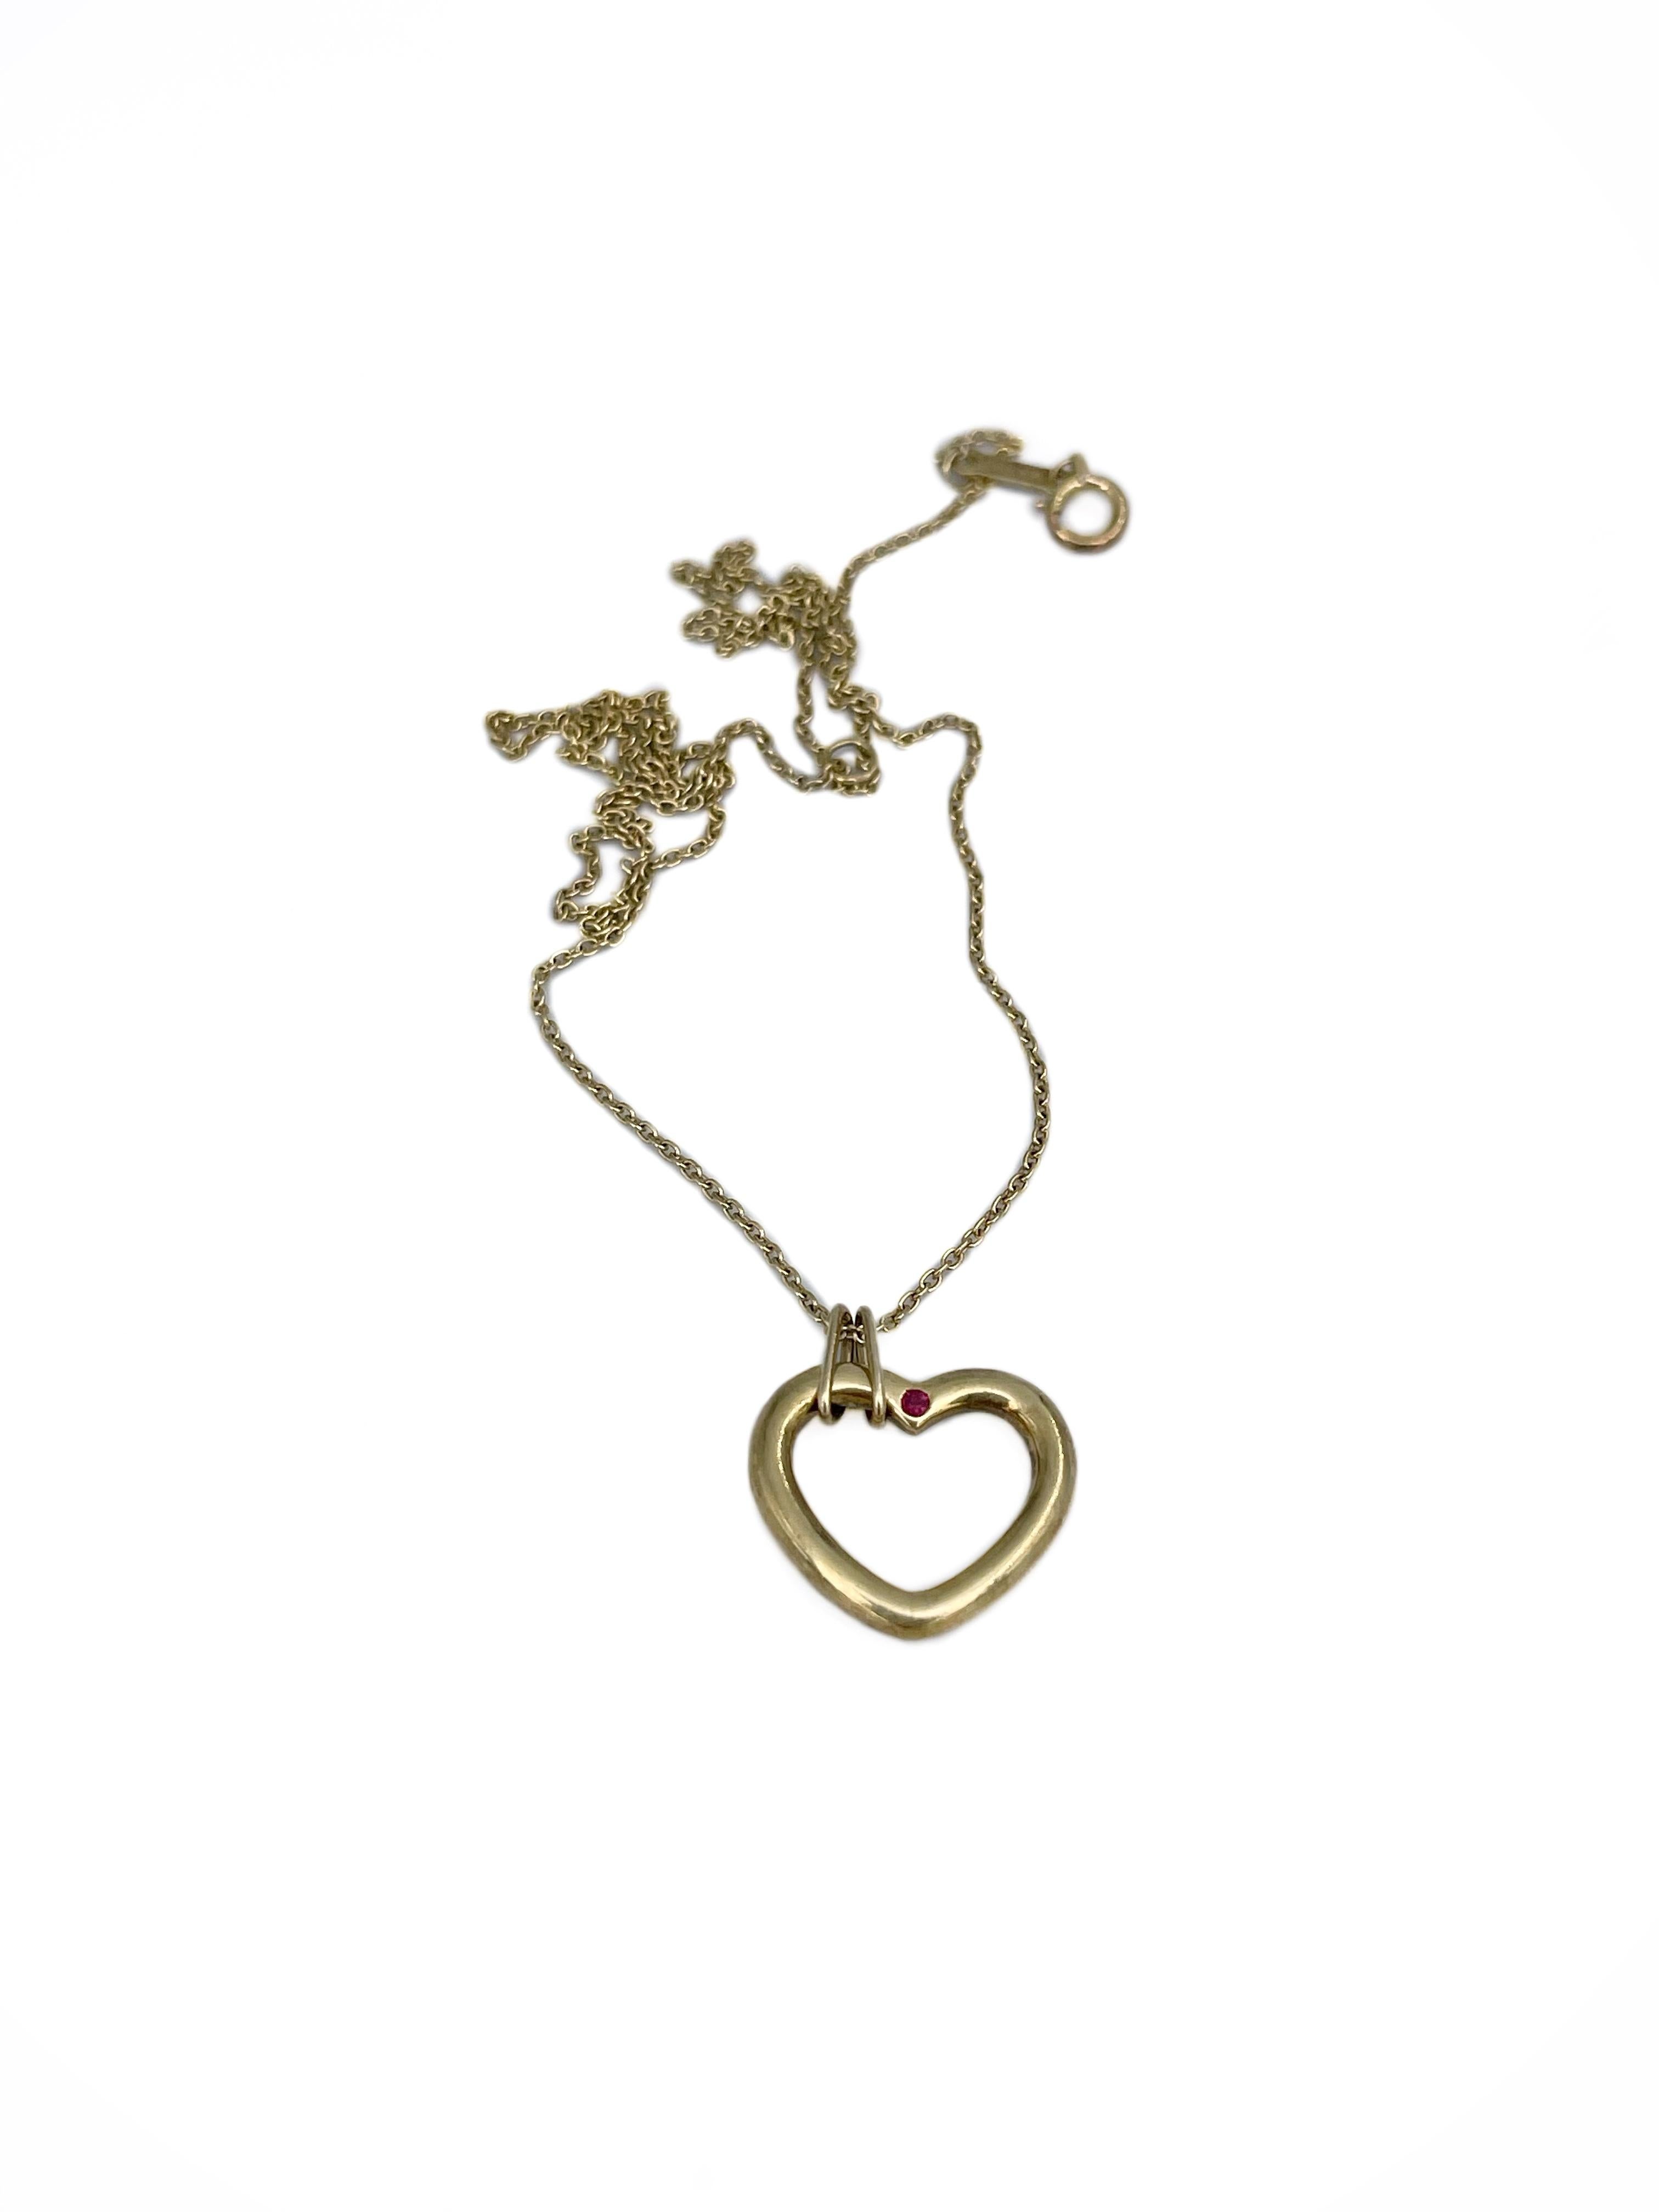 This is a classic design heart shape pendant with a chain designed by Tiffany & Co. in 2000s. It is crafted in 18K yellow gold. 

It features 1 ruby: round cut, 0.01ct, R 5/4, VS.

Signed: Tiffany & Co. K18

Weight: 3.92g
Pendant size: